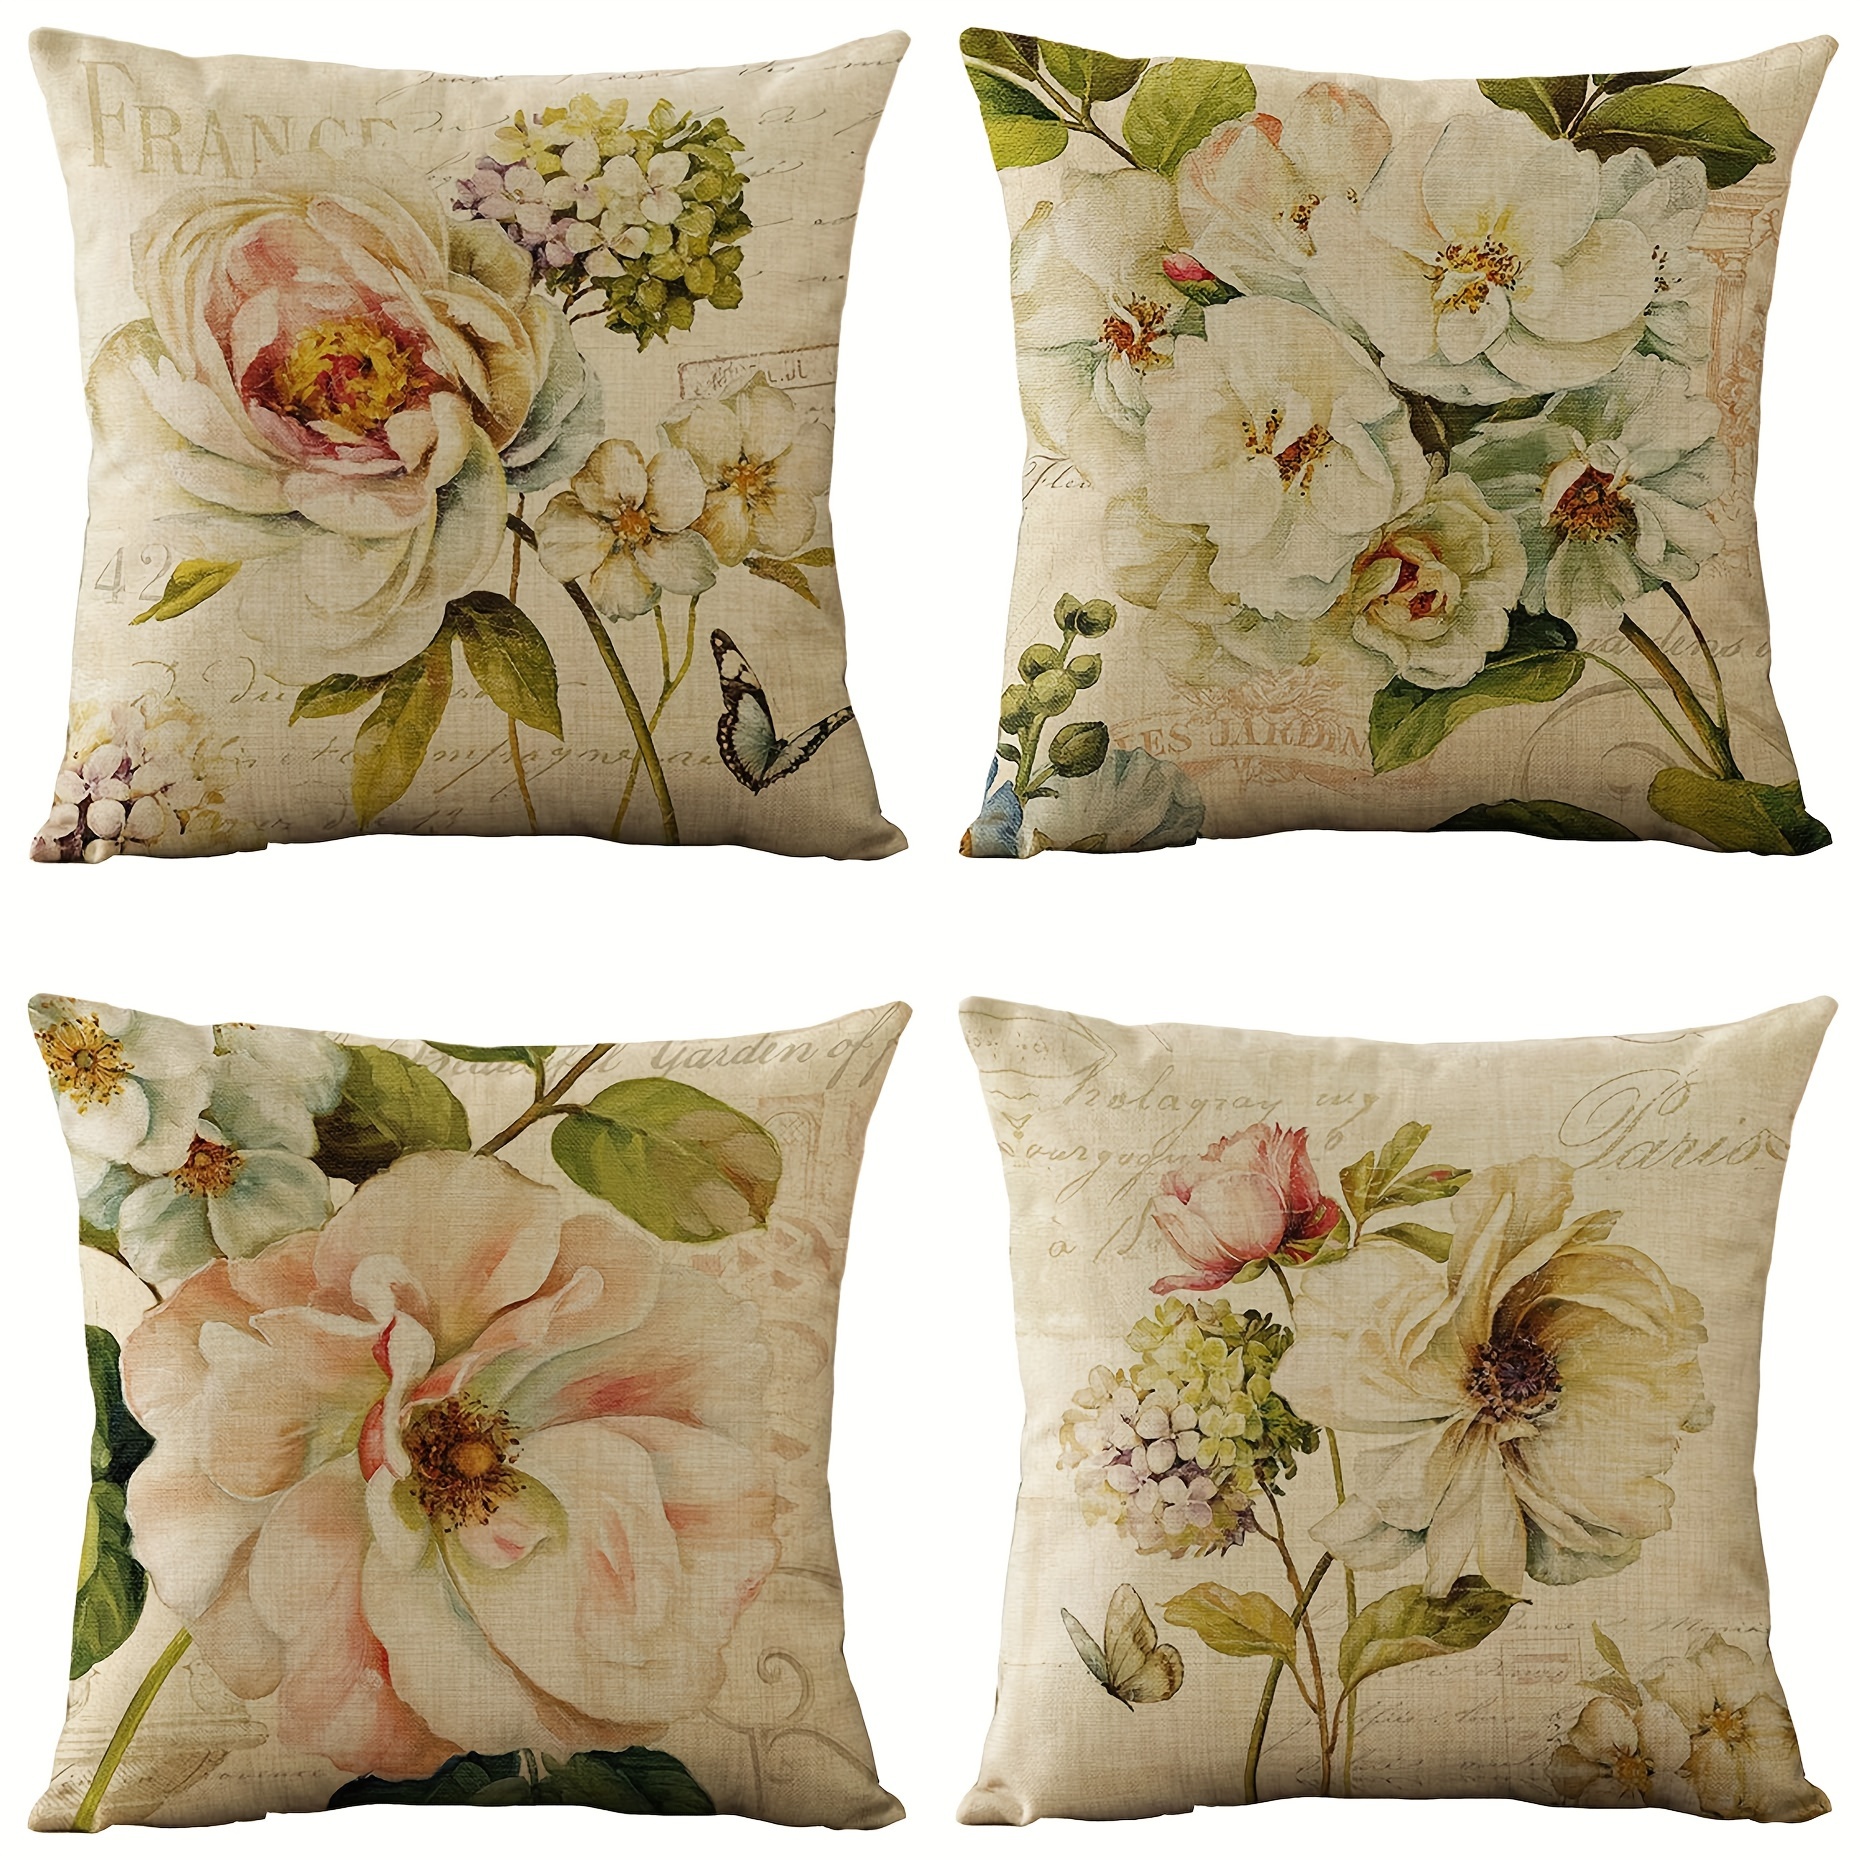 

4pcs Vintage Spring Flower Decorative Throw Pillow Covers Pillow Cases Cushion Cases Short Plush Toss Throw Pillow Covers For Living Room, Couch And Bed (no Pillow Core)